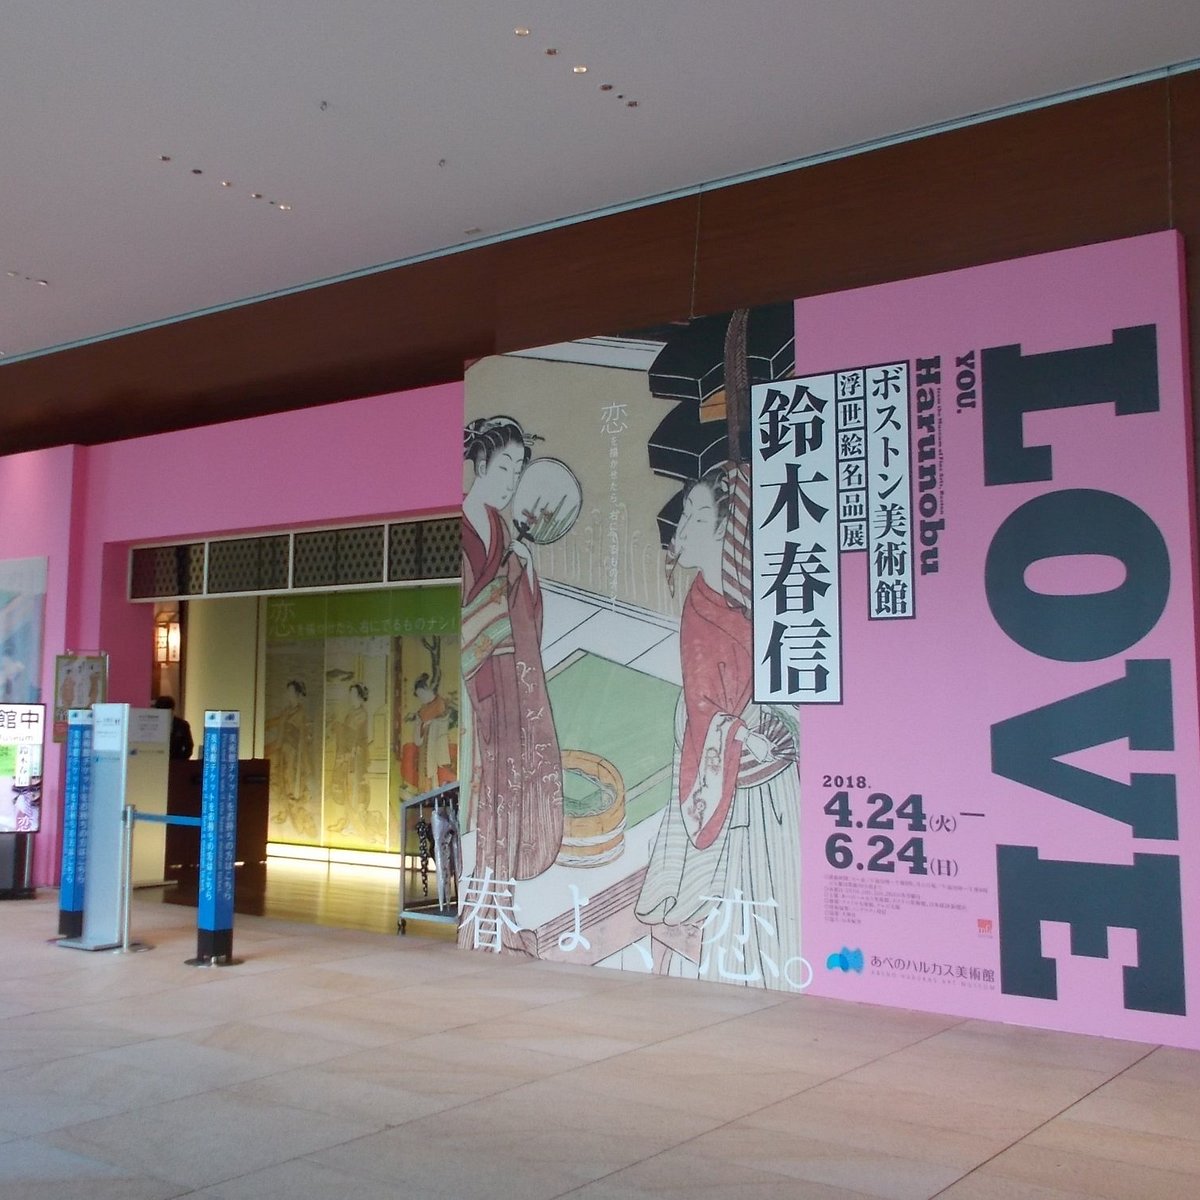 Abeno Harukas Art Museum Osaka All You Need To Know Before You Go